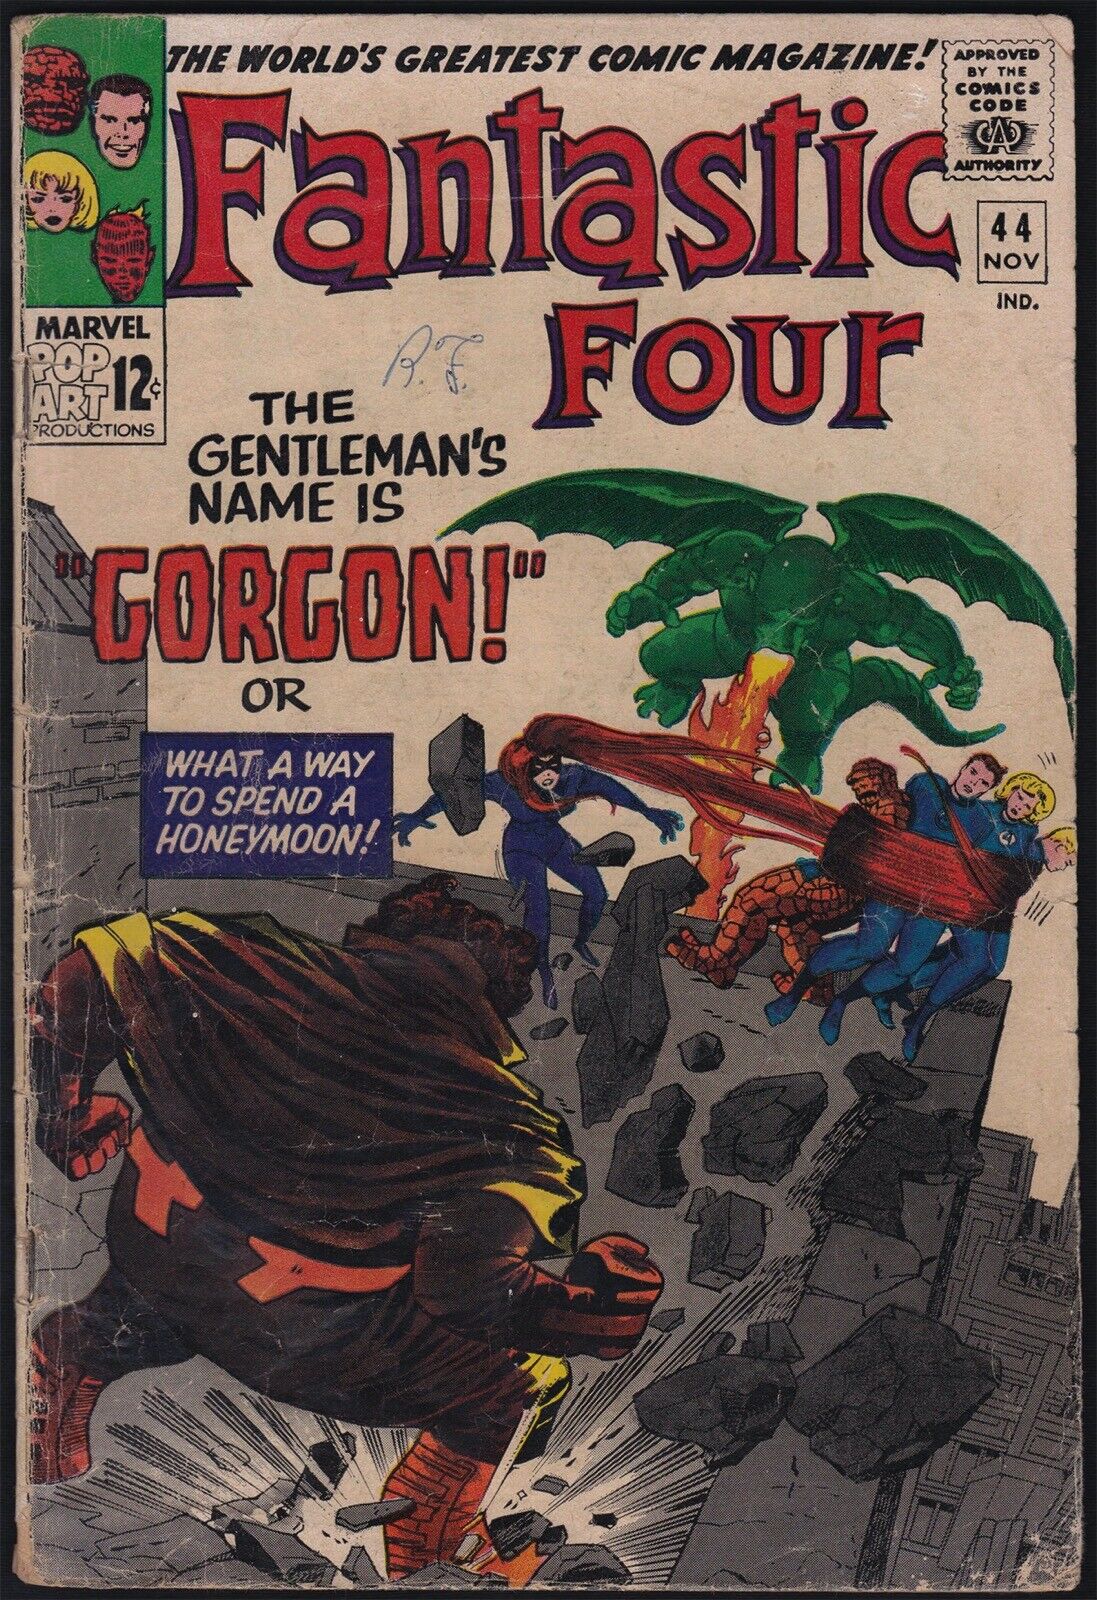 Marvel Comics FANTASTIC FOUR #44 1965 First Appearance of Gorgon VG-/GD